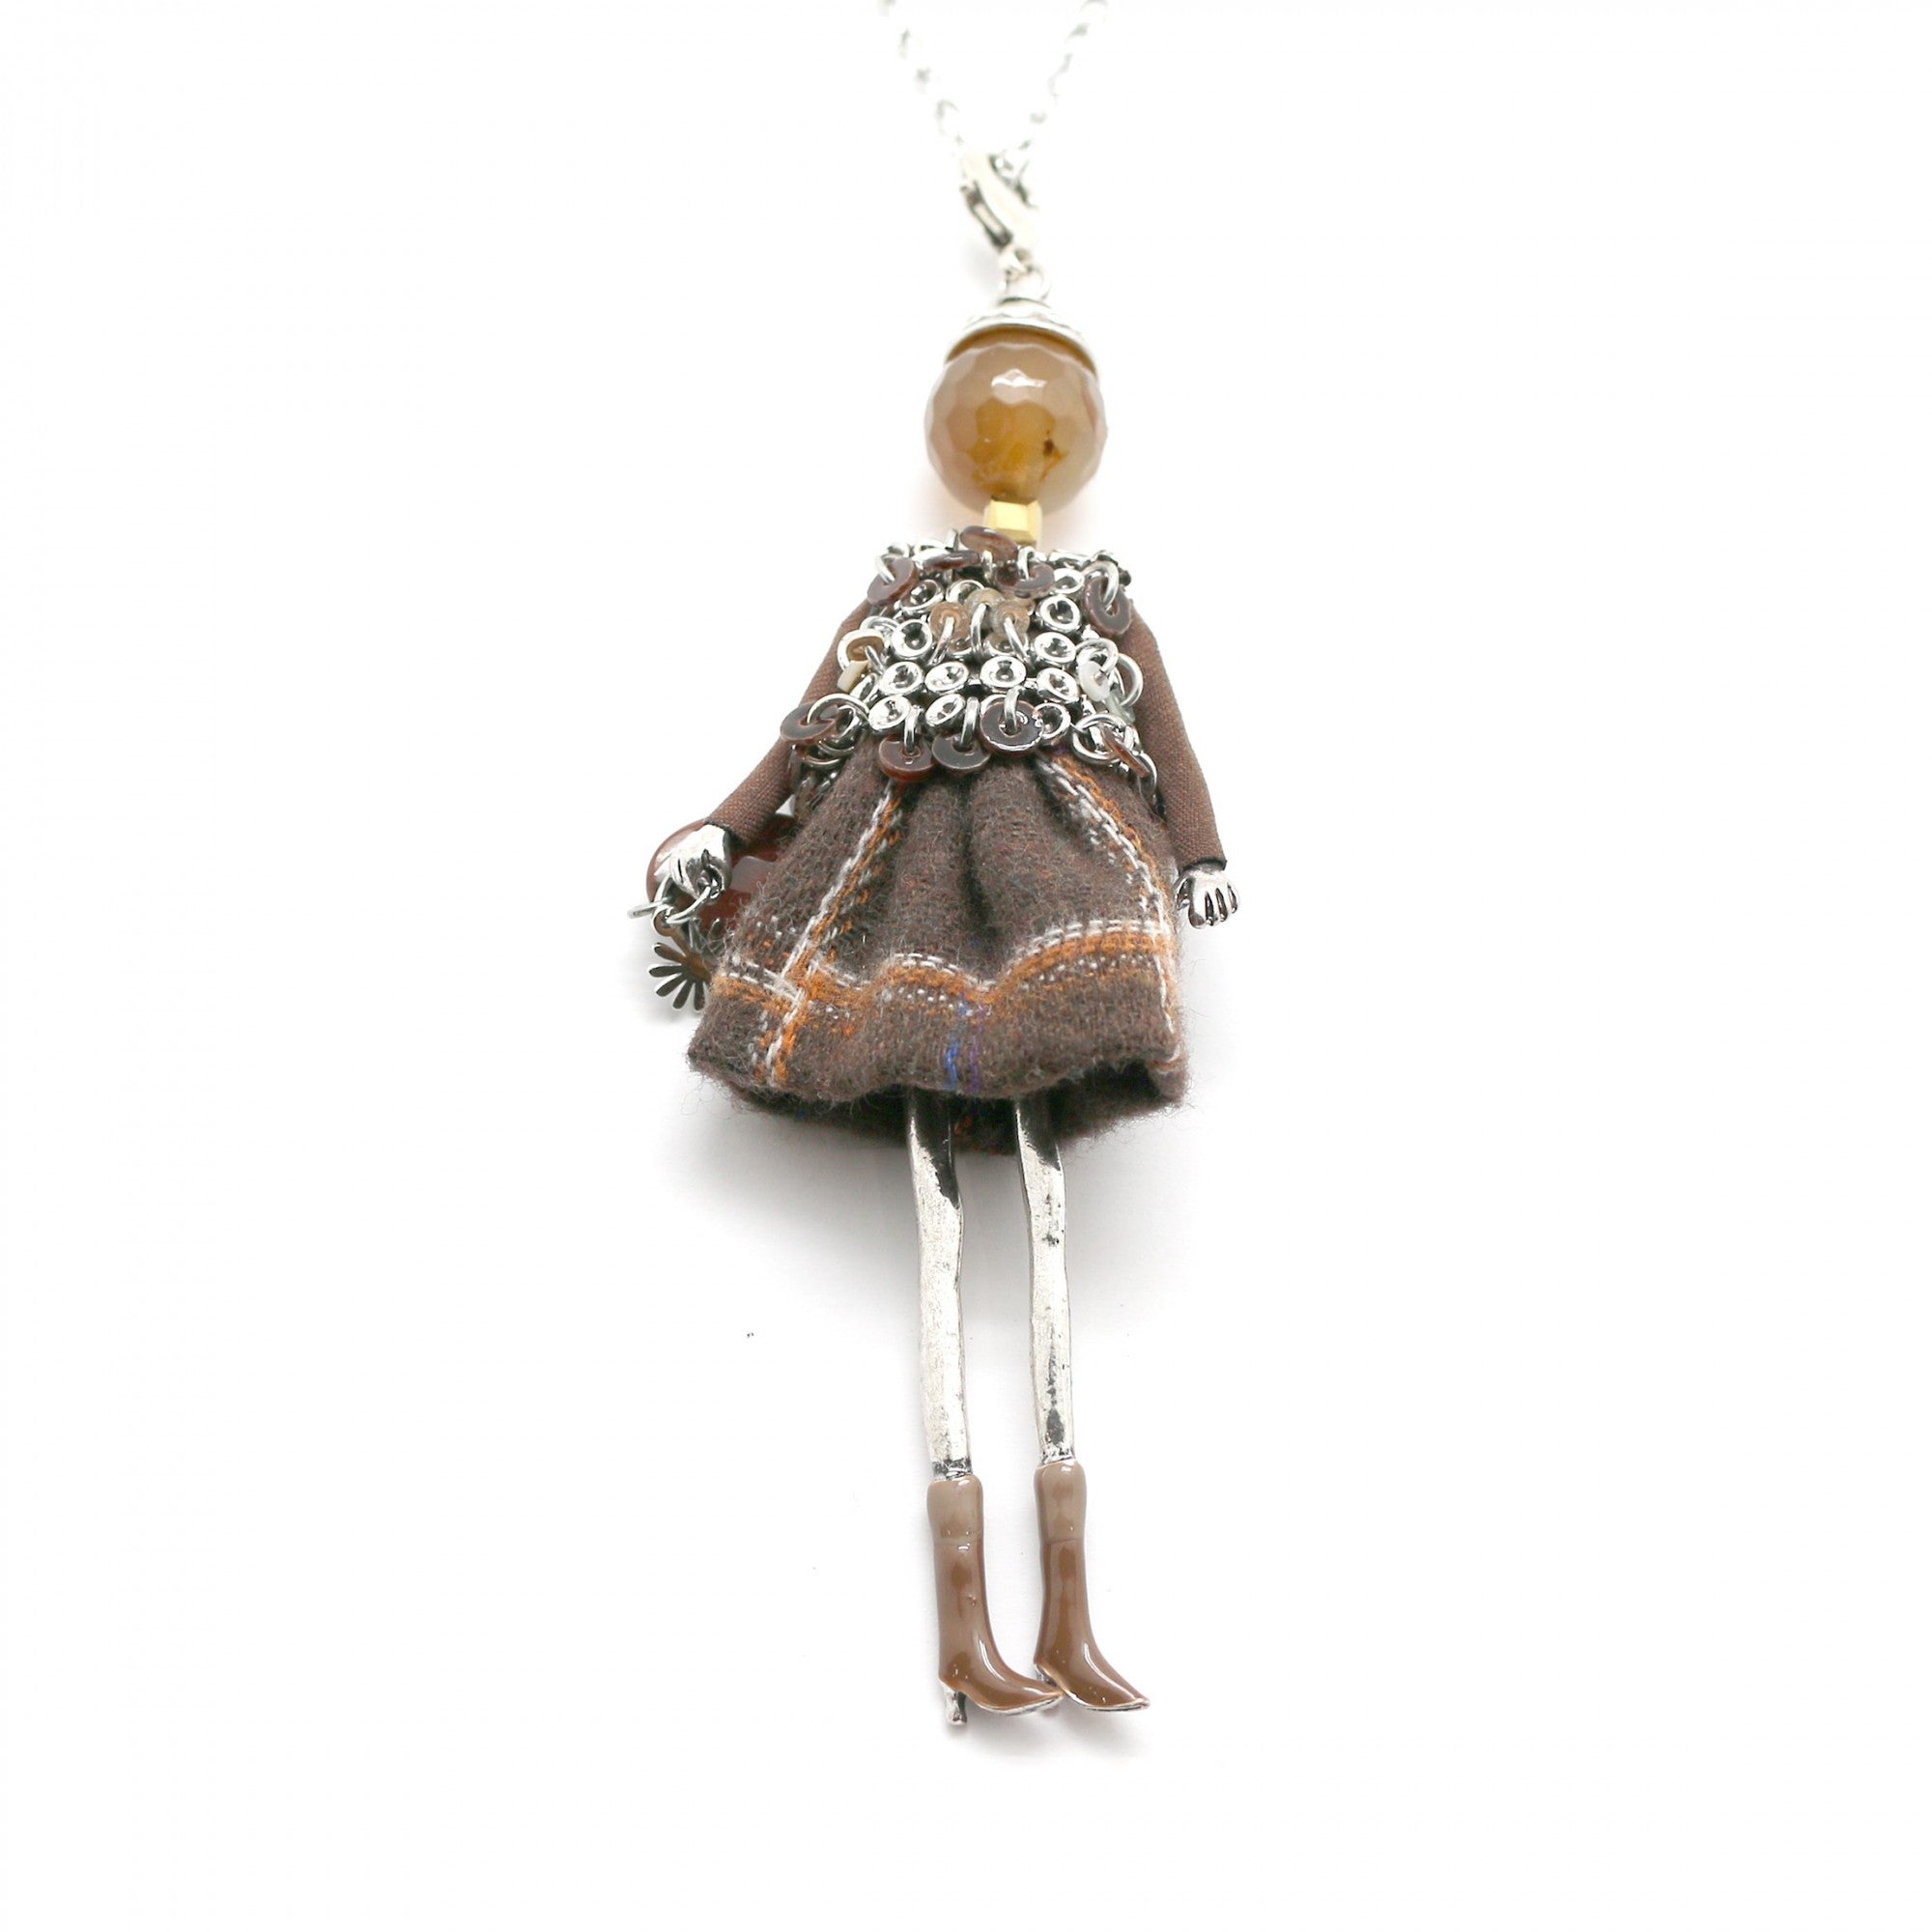 Moon C Doll Pendant on a Long Chain, Agate, Fabric, Metal / Beige, Brown / 4 Inches / Gift Idea